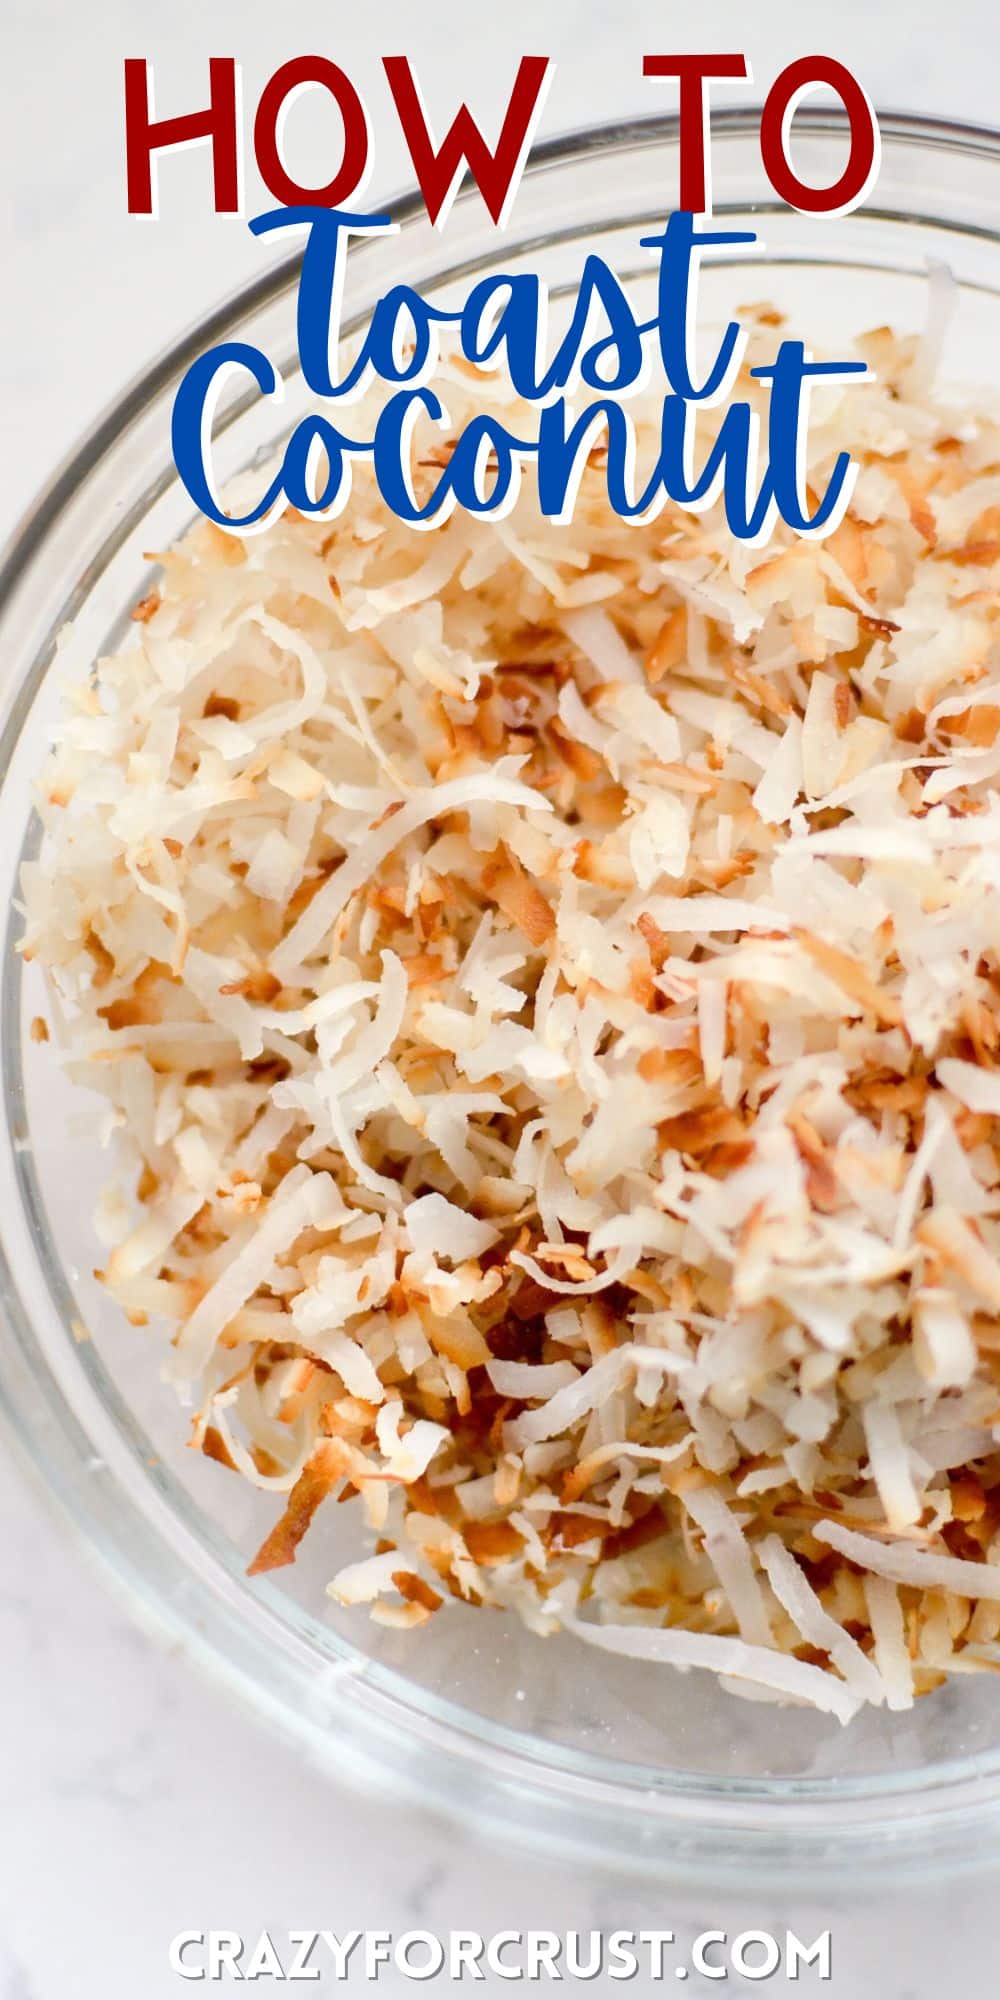 shredded coconut in a clear bowl with words on the image.